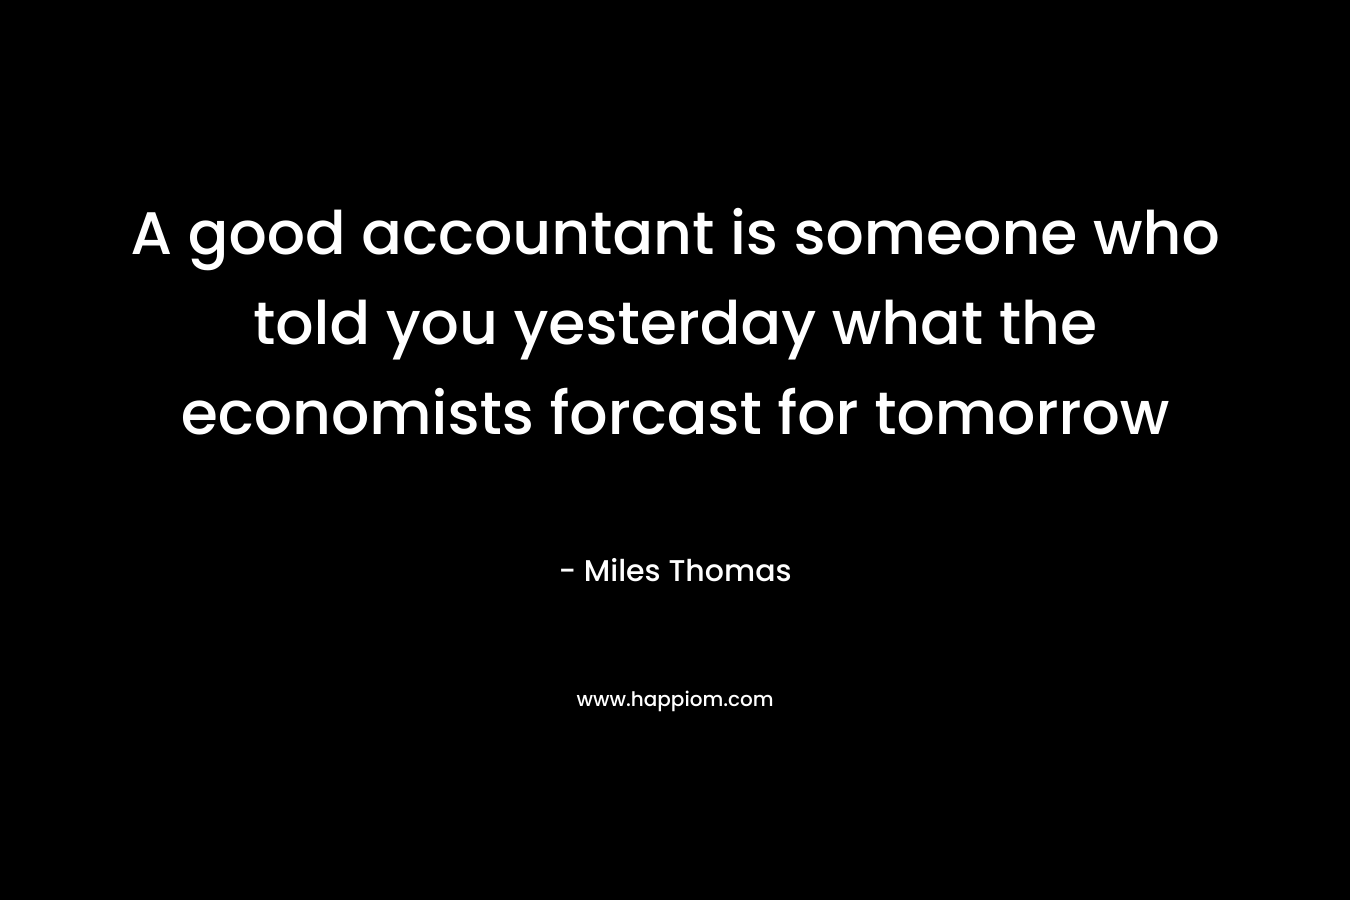 A good accountant is someone who told you yesterday what the economists forcast for tomorrow – Miles Thomas